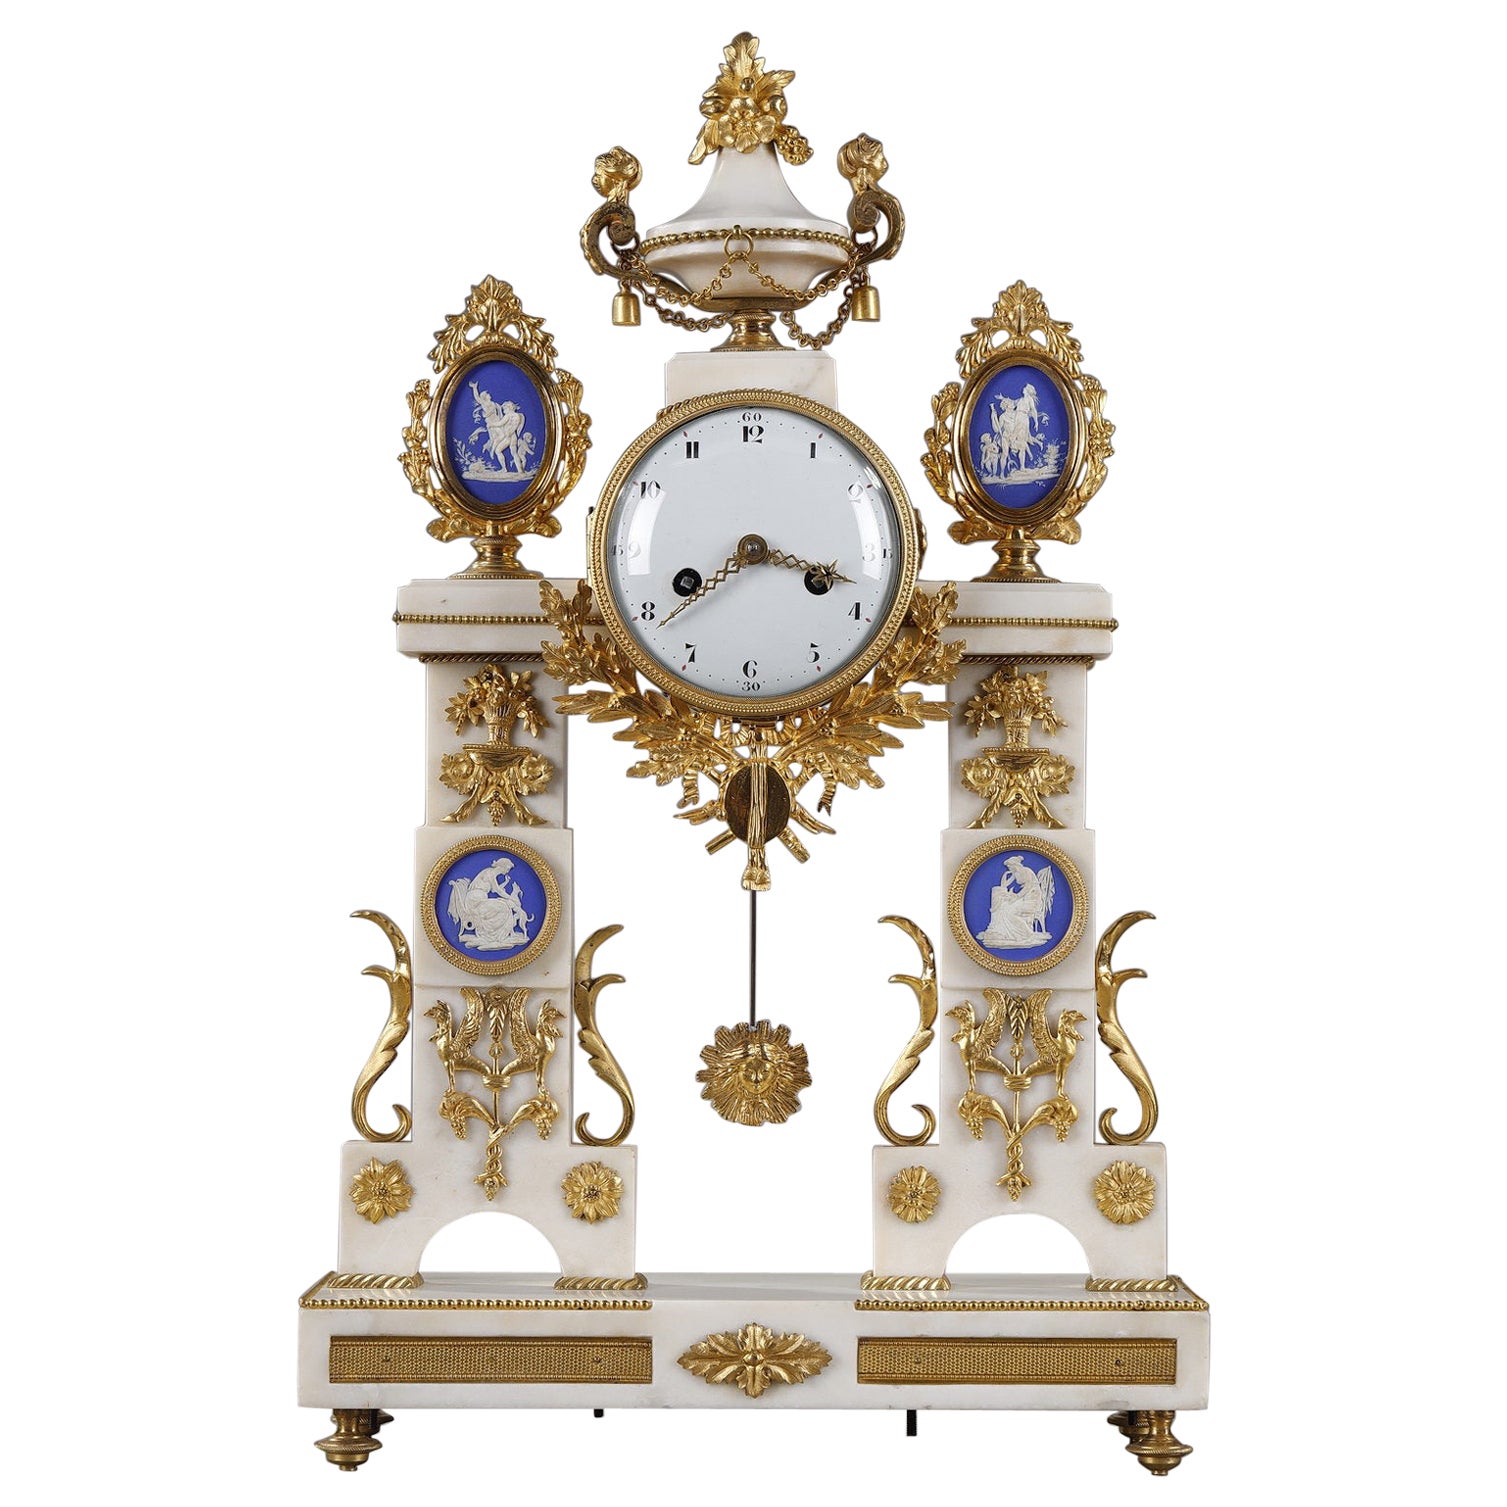 Important Louis XVI Period Clock with Wedgewood Decorations